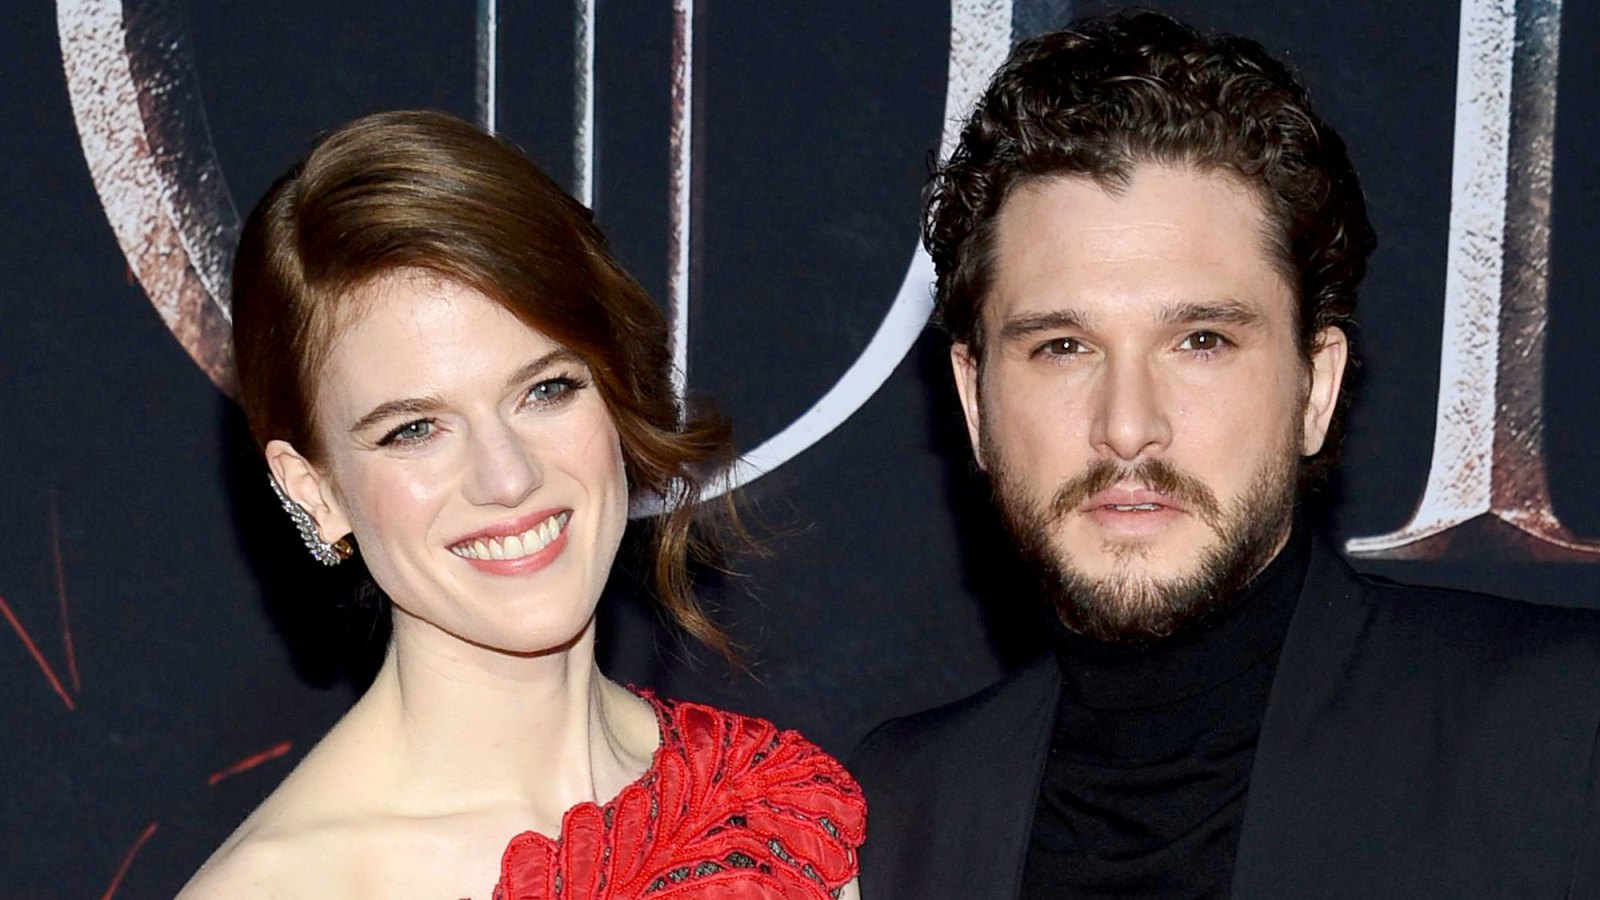 Kit Harington and Rose Leslie Spotted Together for 1st Time in 5 Months During Rare Public Date Night